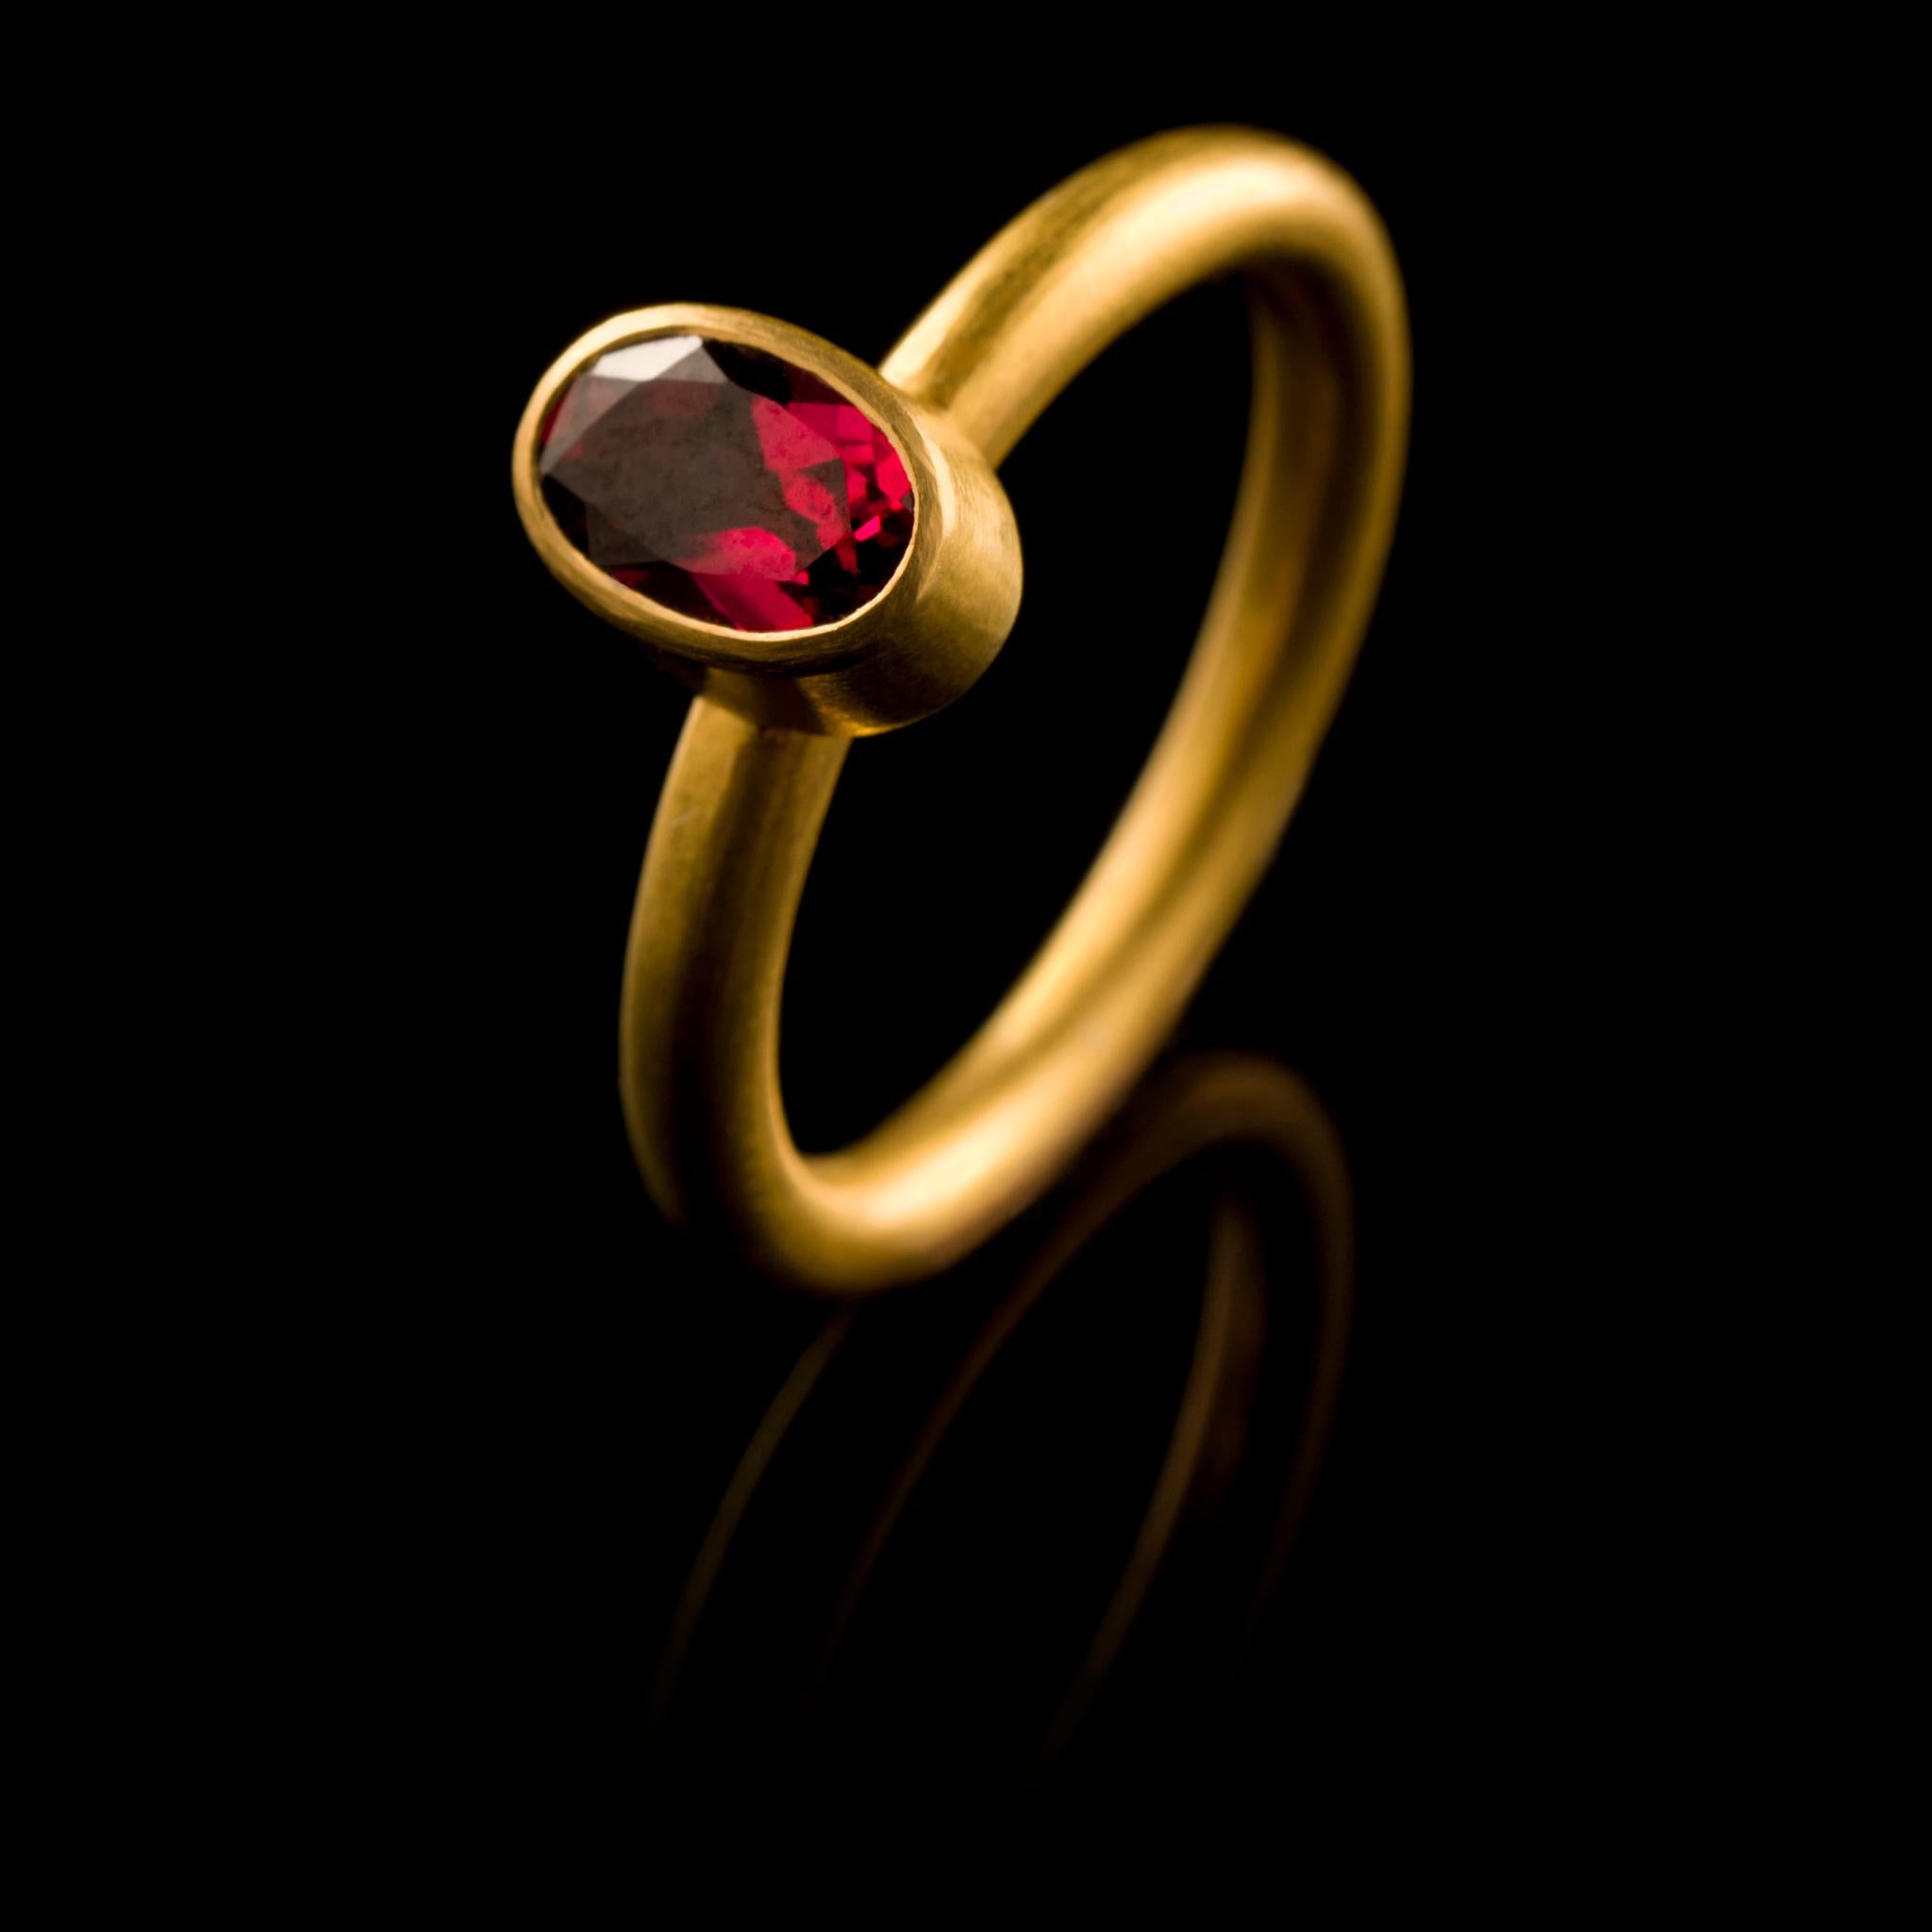 A chic, hand crafted 18 karat matte gold stacking ring with an oval, faceted hot pink tourmaline. Size: UK O/P, US 7.5, EU 55. The ring can be resized. Wear it on its own or with other rings from the collection as shown on our model.